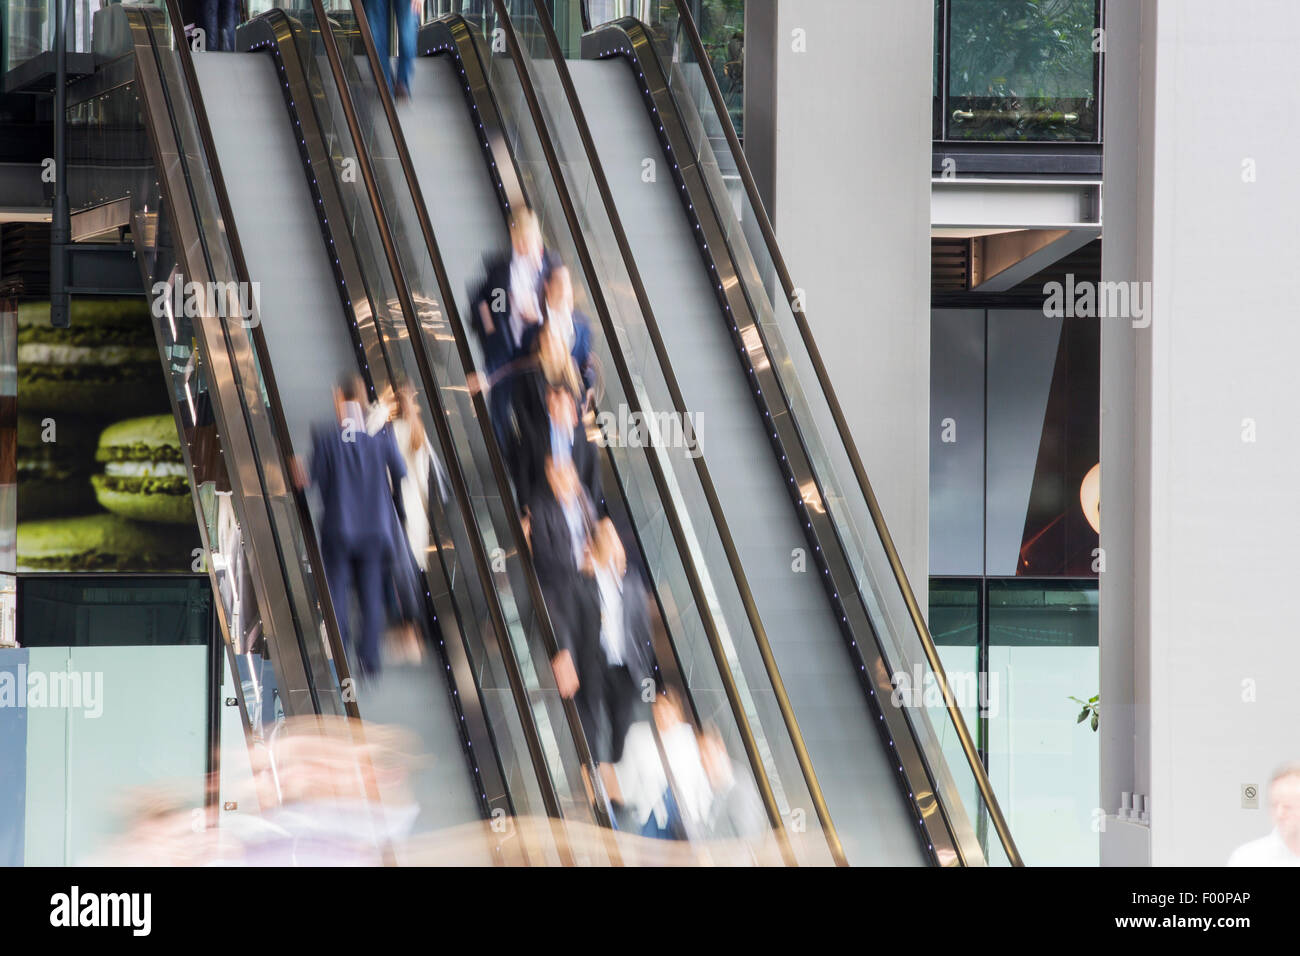 Workers entering and leaving the new Leadenhall building via escalator in the City of London, UK. Stock Photo